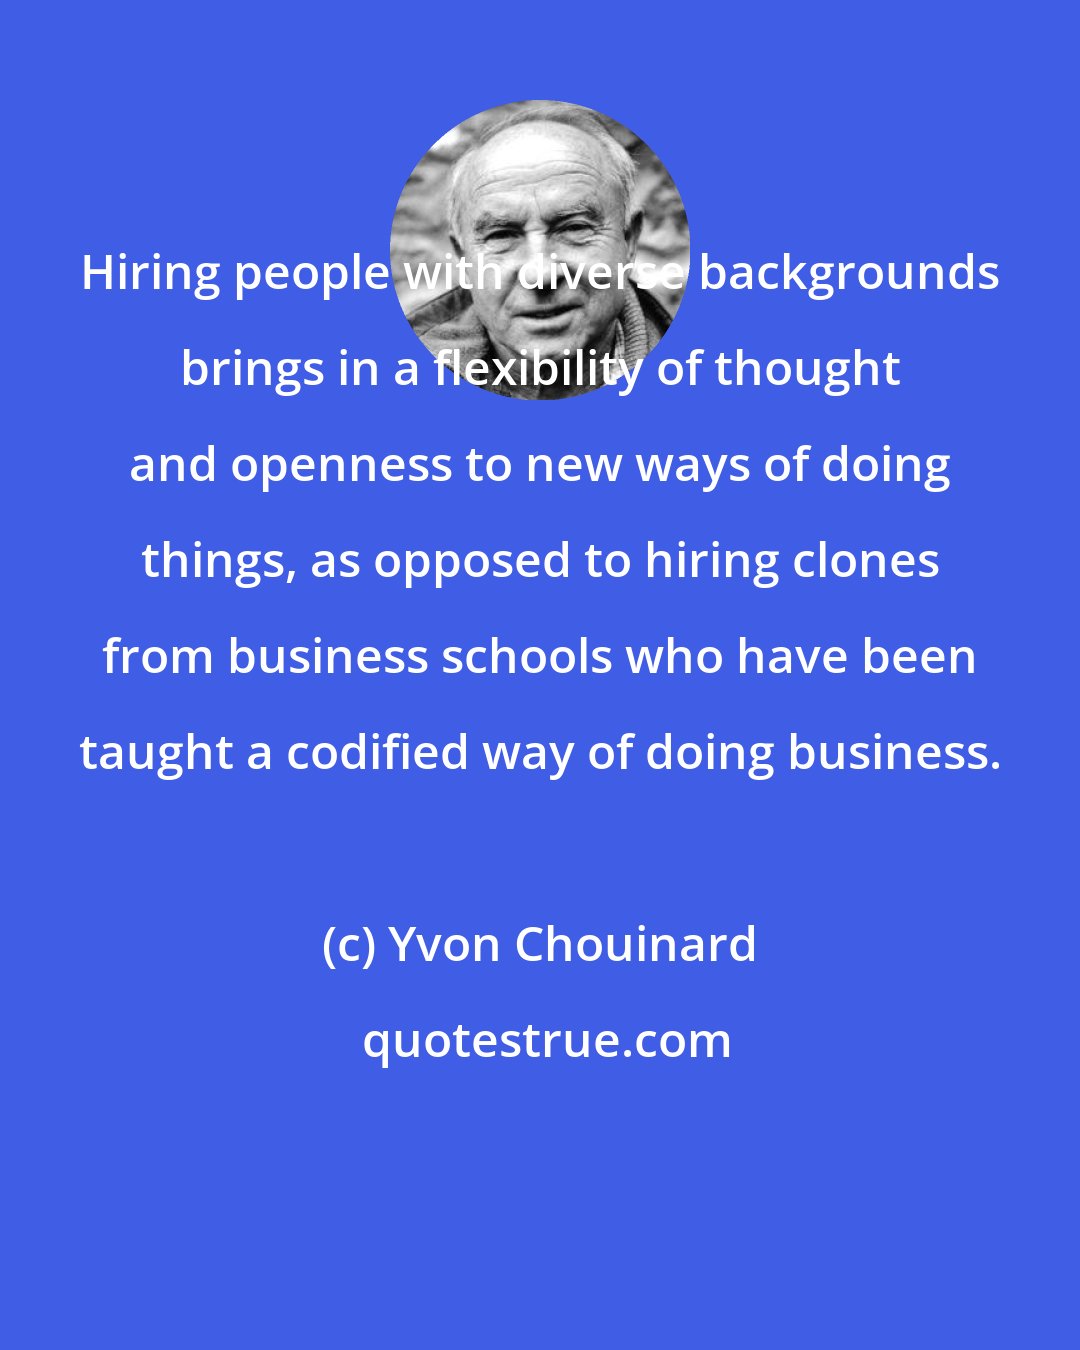 Yvon Chouinard: Hiring people with diverse backgrounds brings in a flexibility of thought and openness to new ways of doing things, as opposed to hiring clones from business schools who have been taught a codified way of doing business.